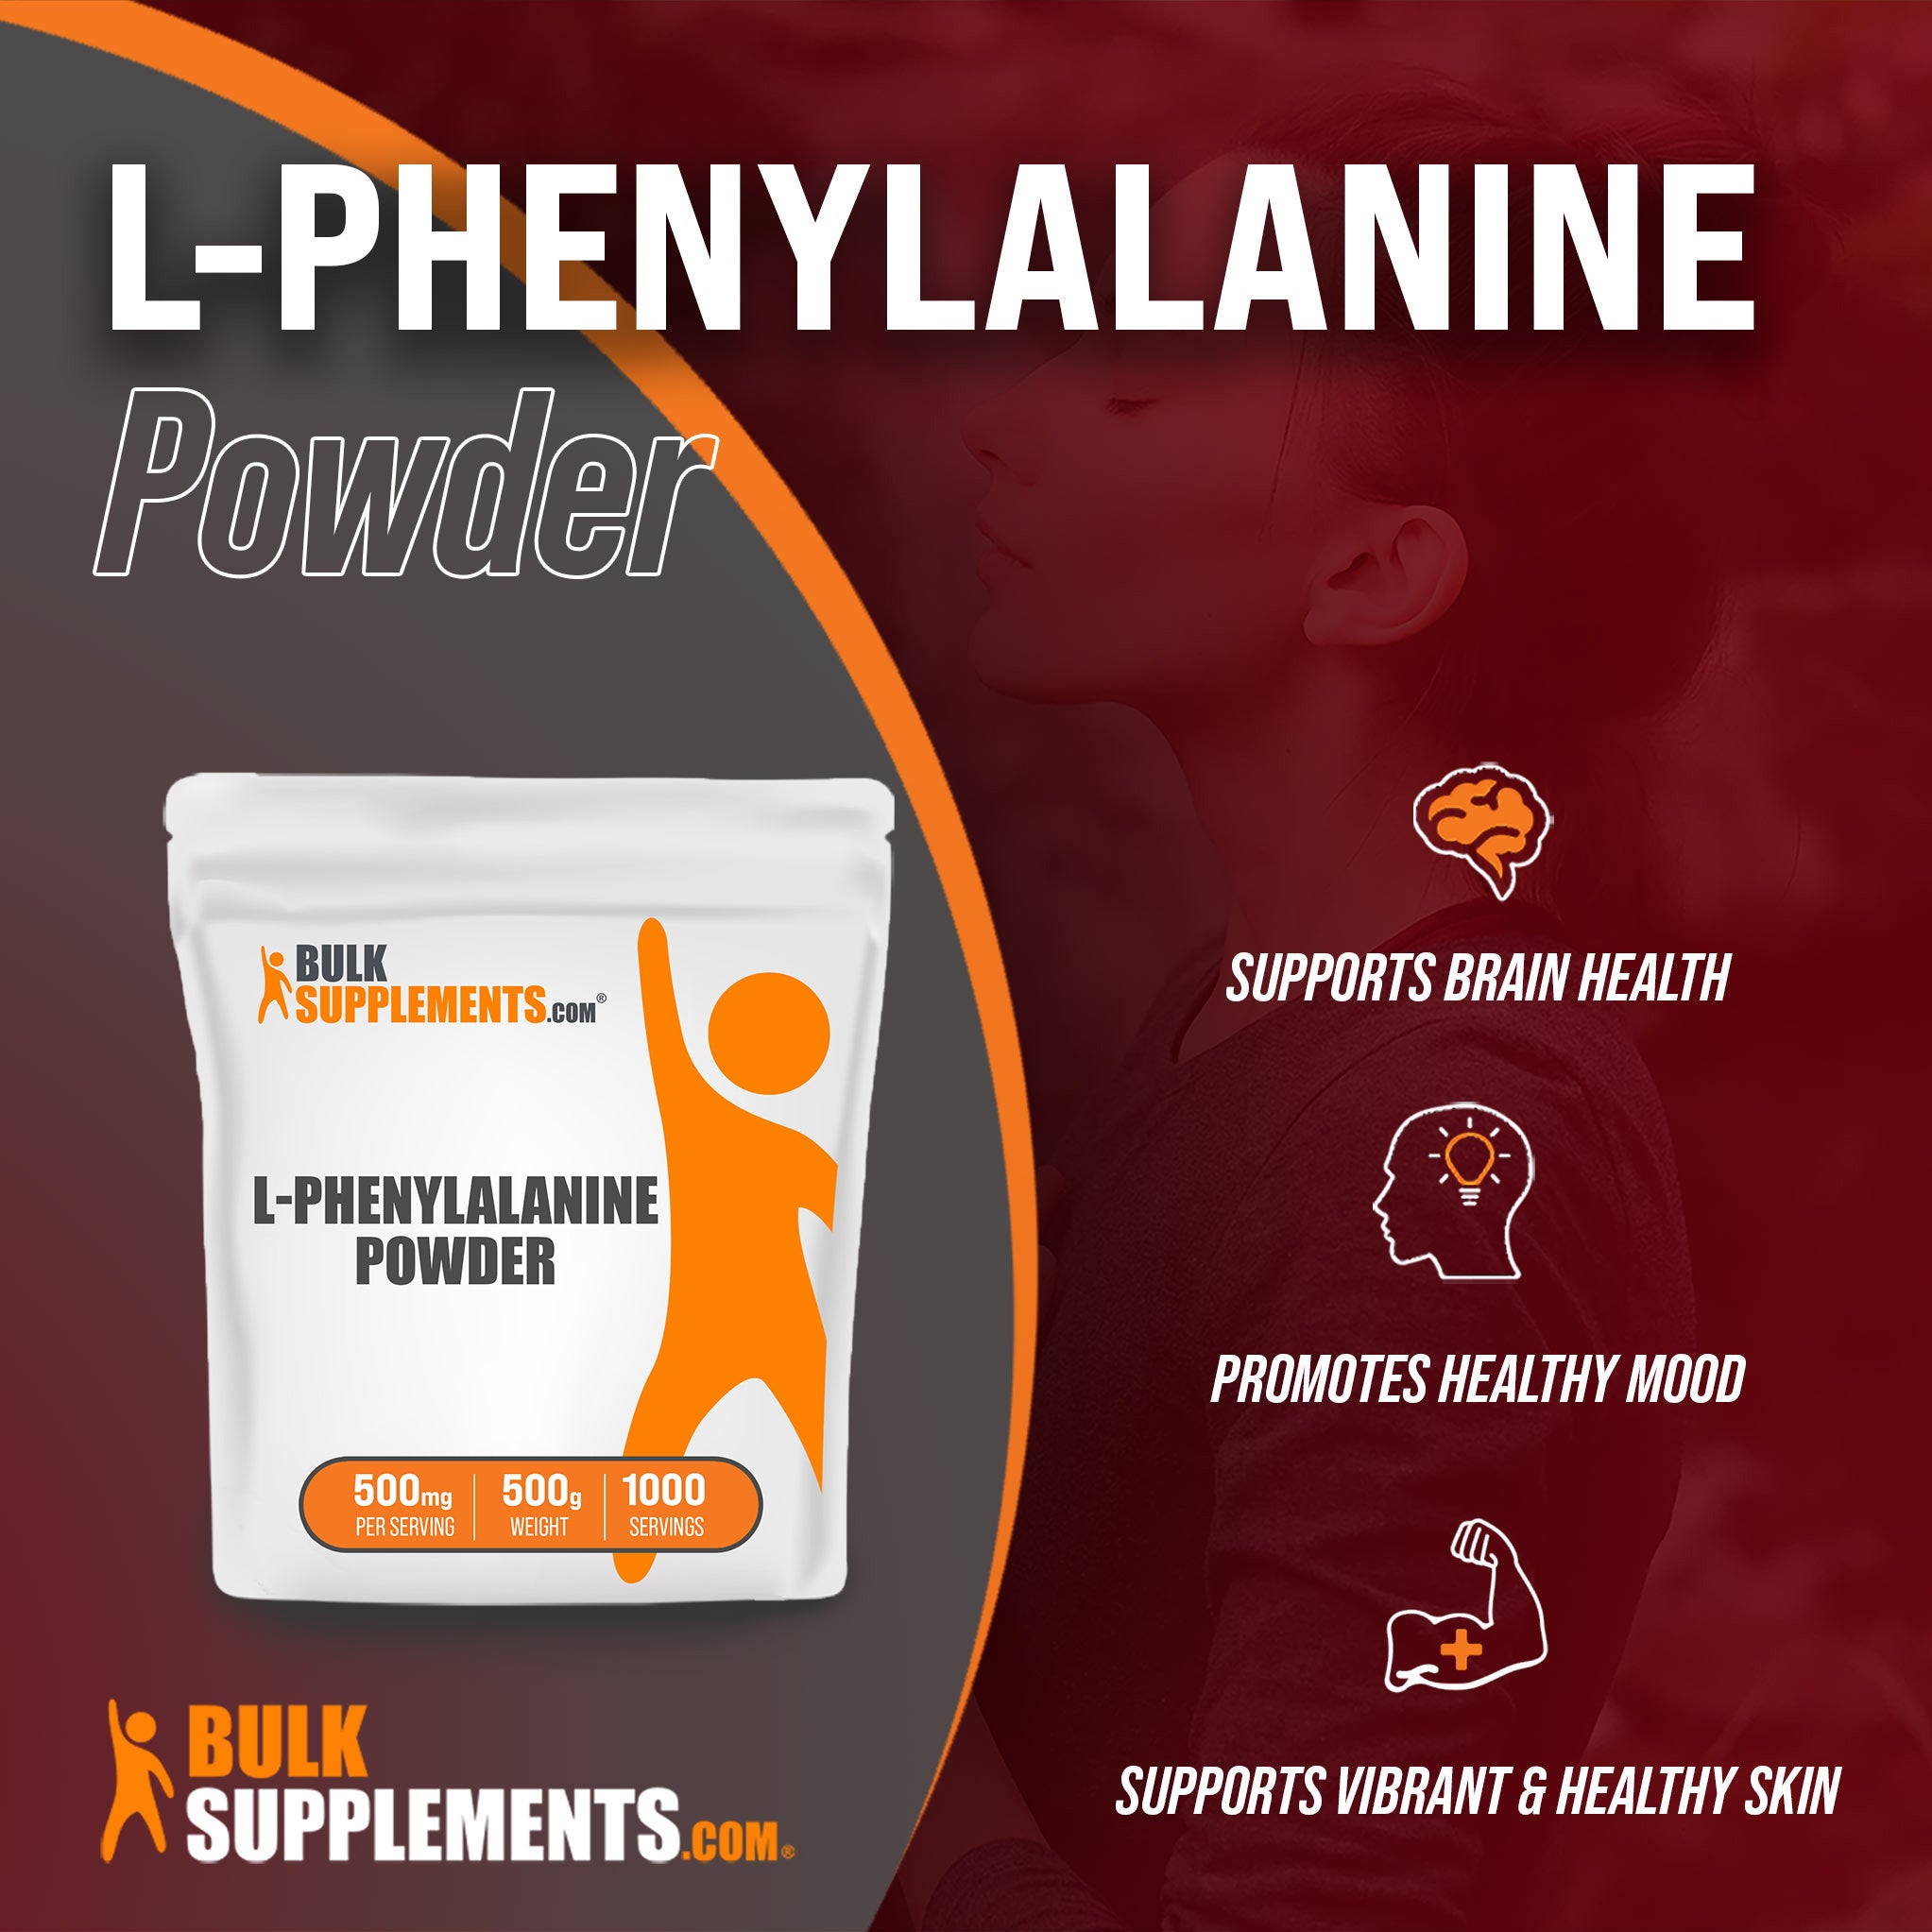 Benefits of L-Phenylalanine: supports brain health, promotes healthy mood, supports vibrant and healthy skin